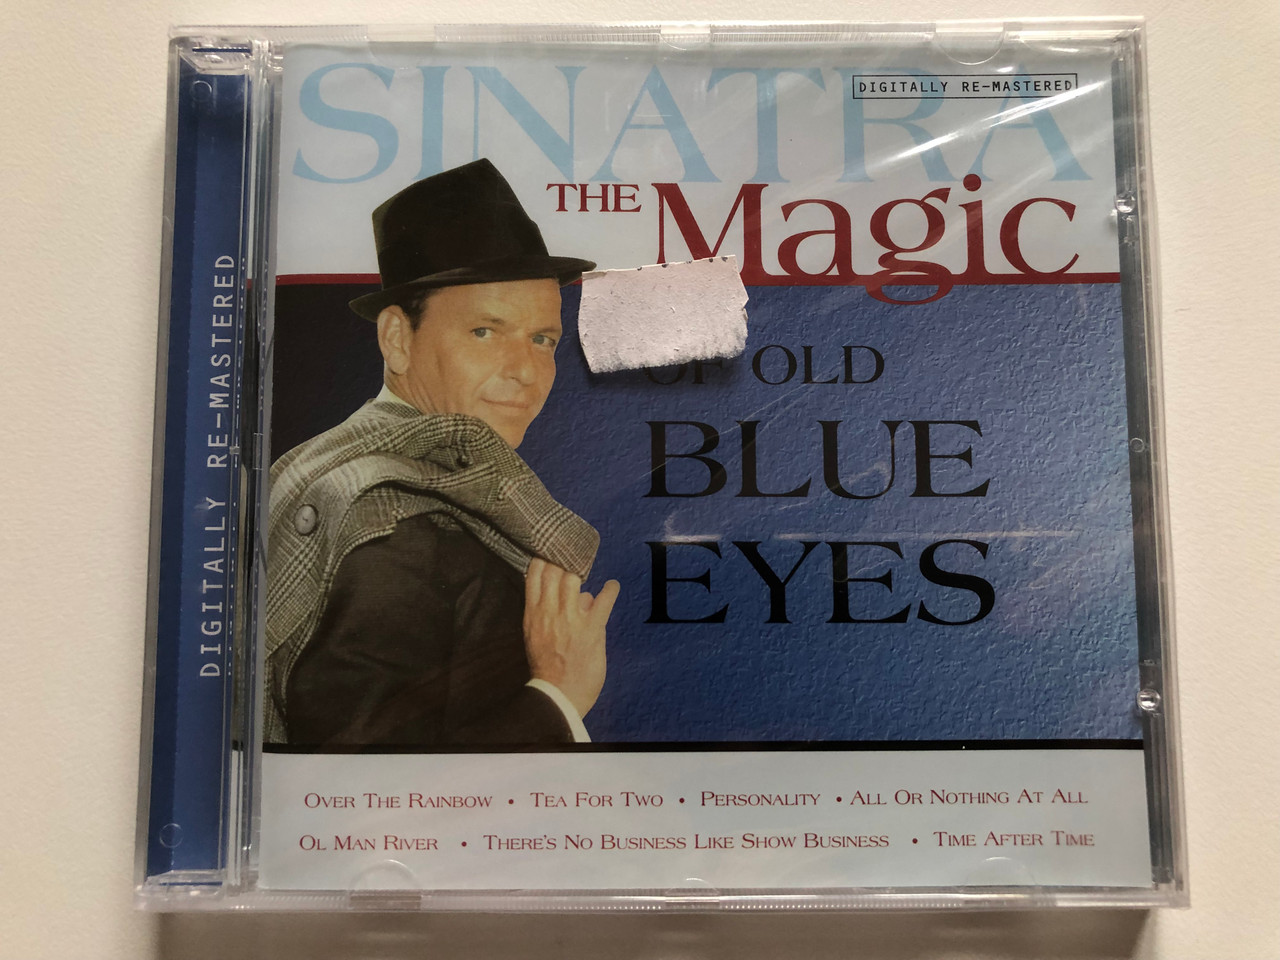 https://cdn10.bigcommerce.com/s-62bdpkt7pb/products/0/images/201415/Sinatra_The_Magic_Of_Old_Blue_Eyes_Over_The_Rainbow_Tea_For_Two_Personality_All_Or_Nothing_At_All_Ol_Man_River_Theres_No_Business_Like_Show_Business_Time_After_Time_Going_For_A_Son_1__13627.1639070893.1280.1280.JPG?c=2&_gl=1*uusa2q*_ga*MjA2NTIxMjE2MC4xNTkwNTEyNTMy*_ga_WS2VZYPC6G*MTYzOTA1NjU4Ni4yMDcuMS4xNjM5MDcwNjM1LjU3